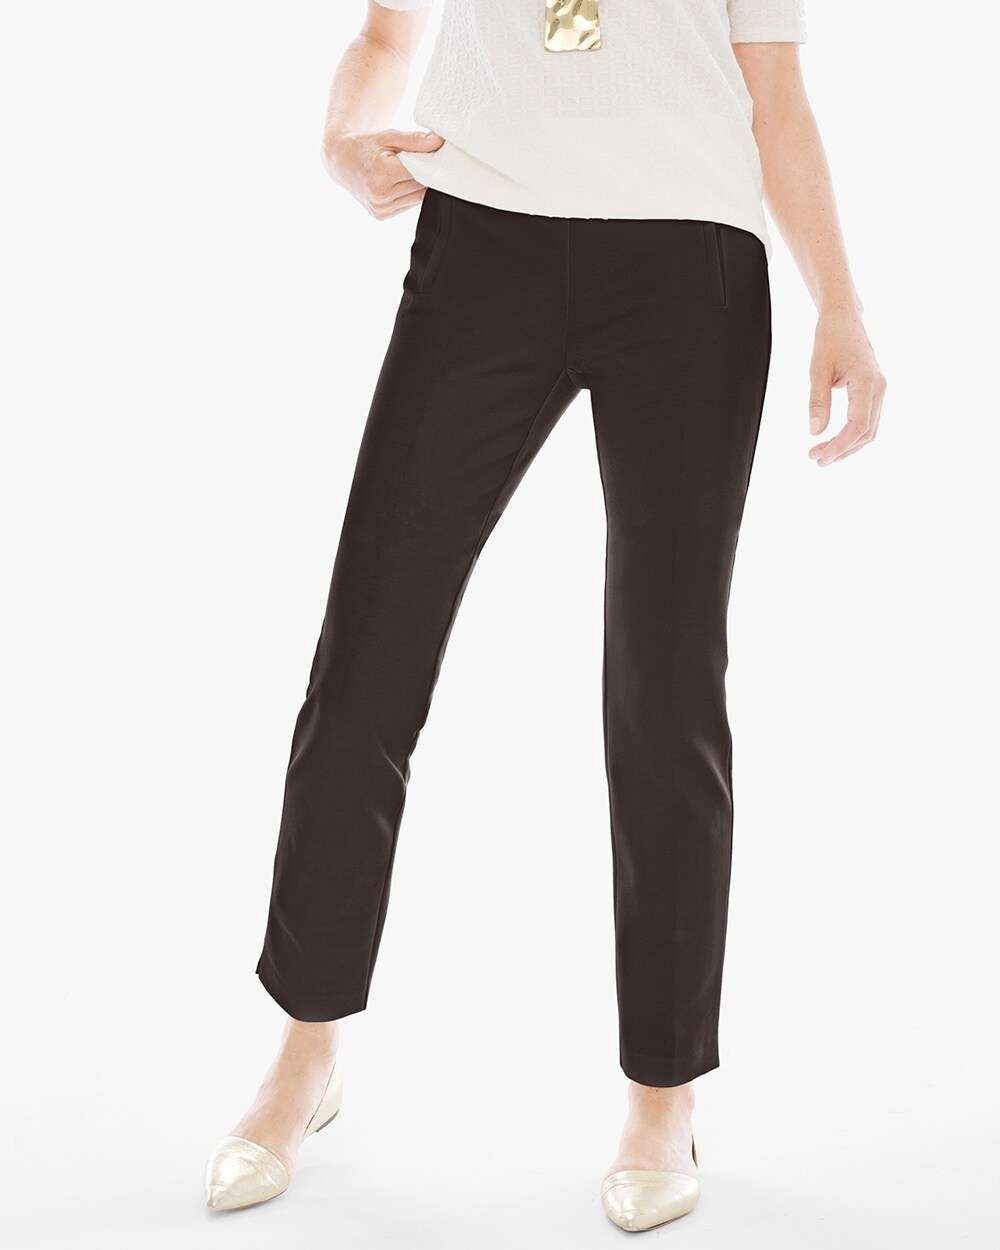 Juliet Ankle Pants in Cocoa Bean